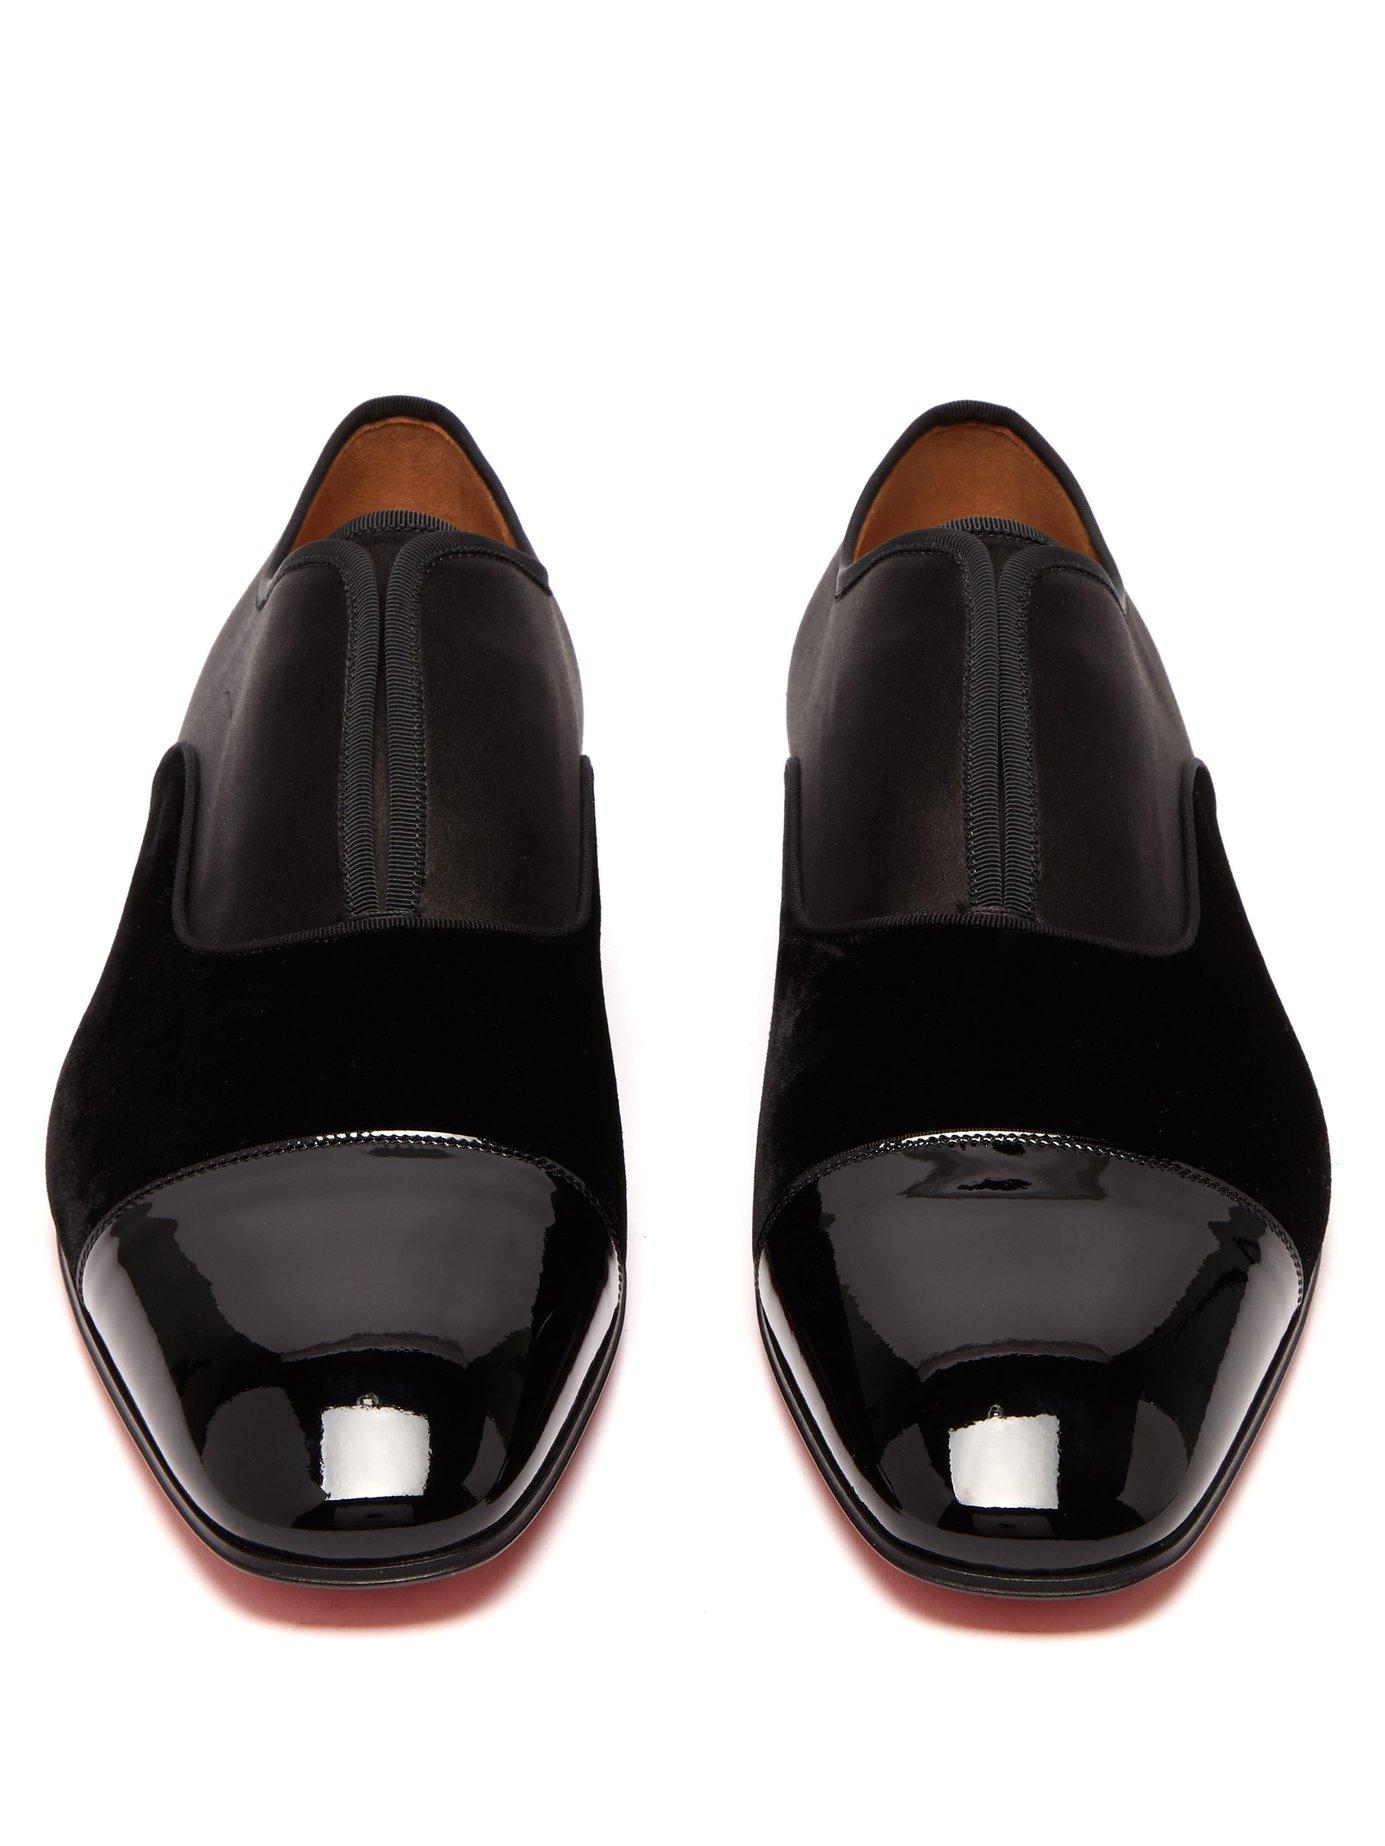 Christian Louboutin Alpha Male Satin And Patent Leather Dress Shoes in Black Men |